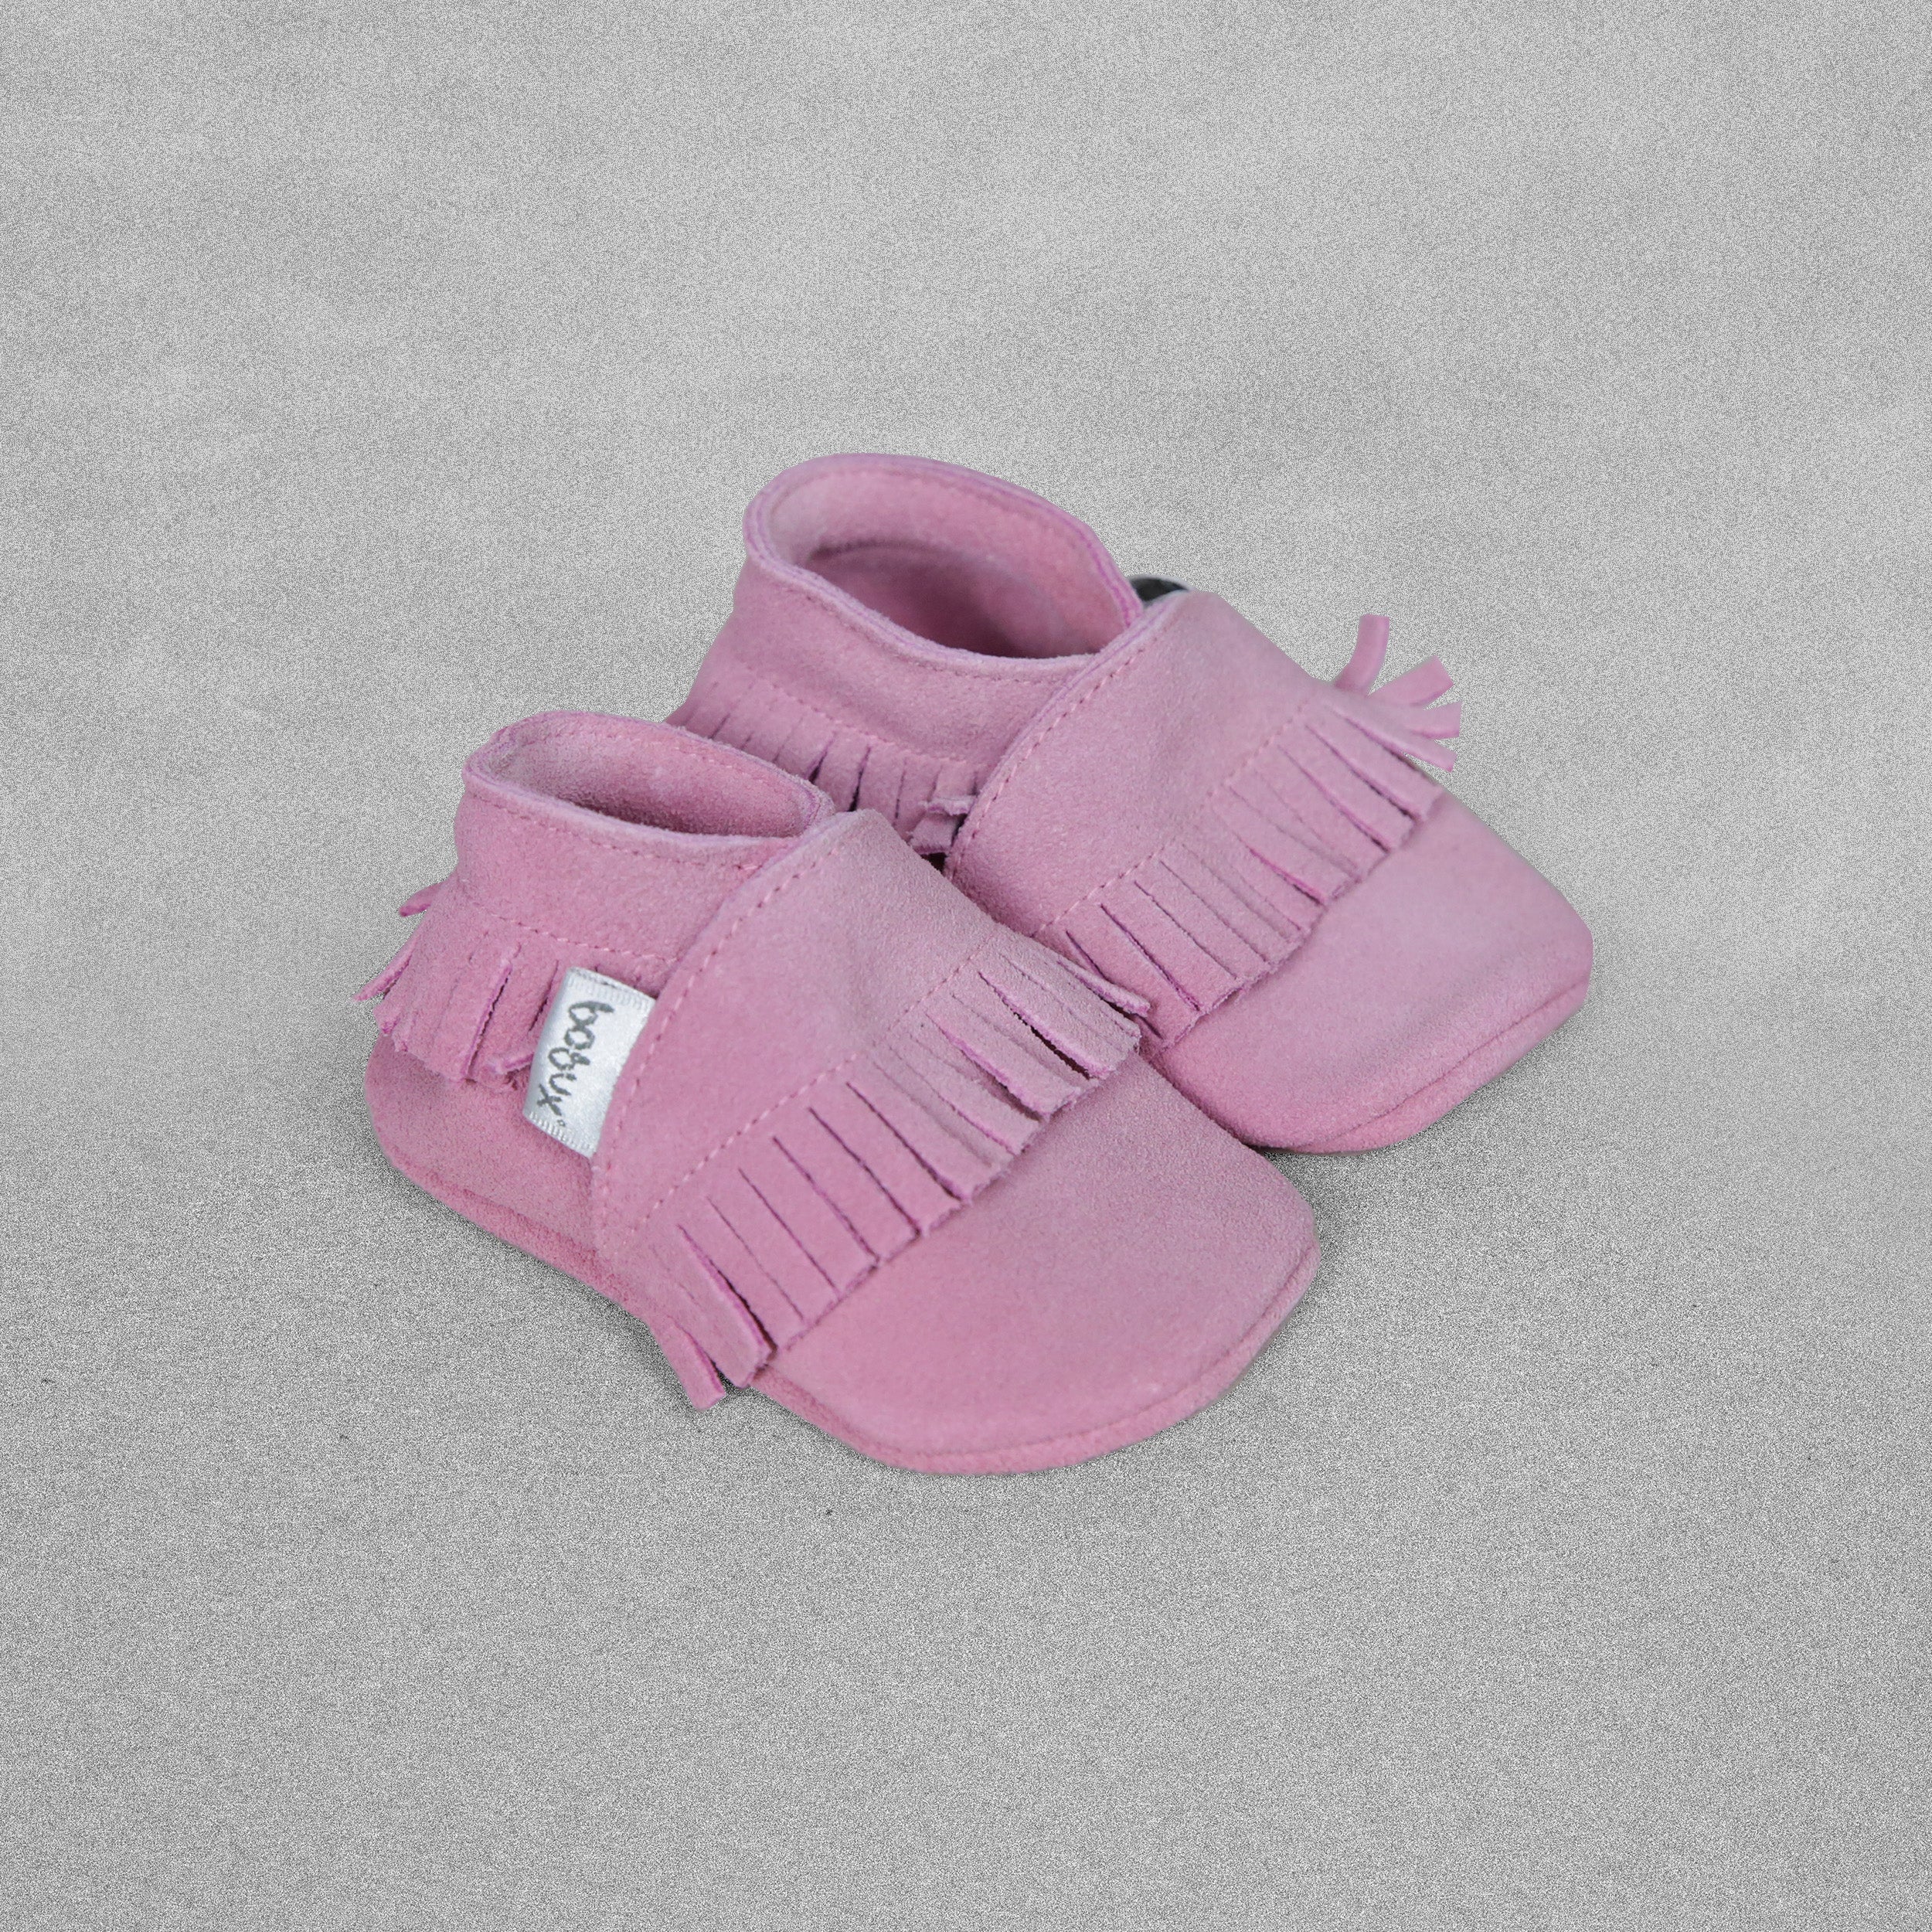 Bobux Soft Sole Baby Shoe 'Pink Moccasin' - Small /3-9 Months